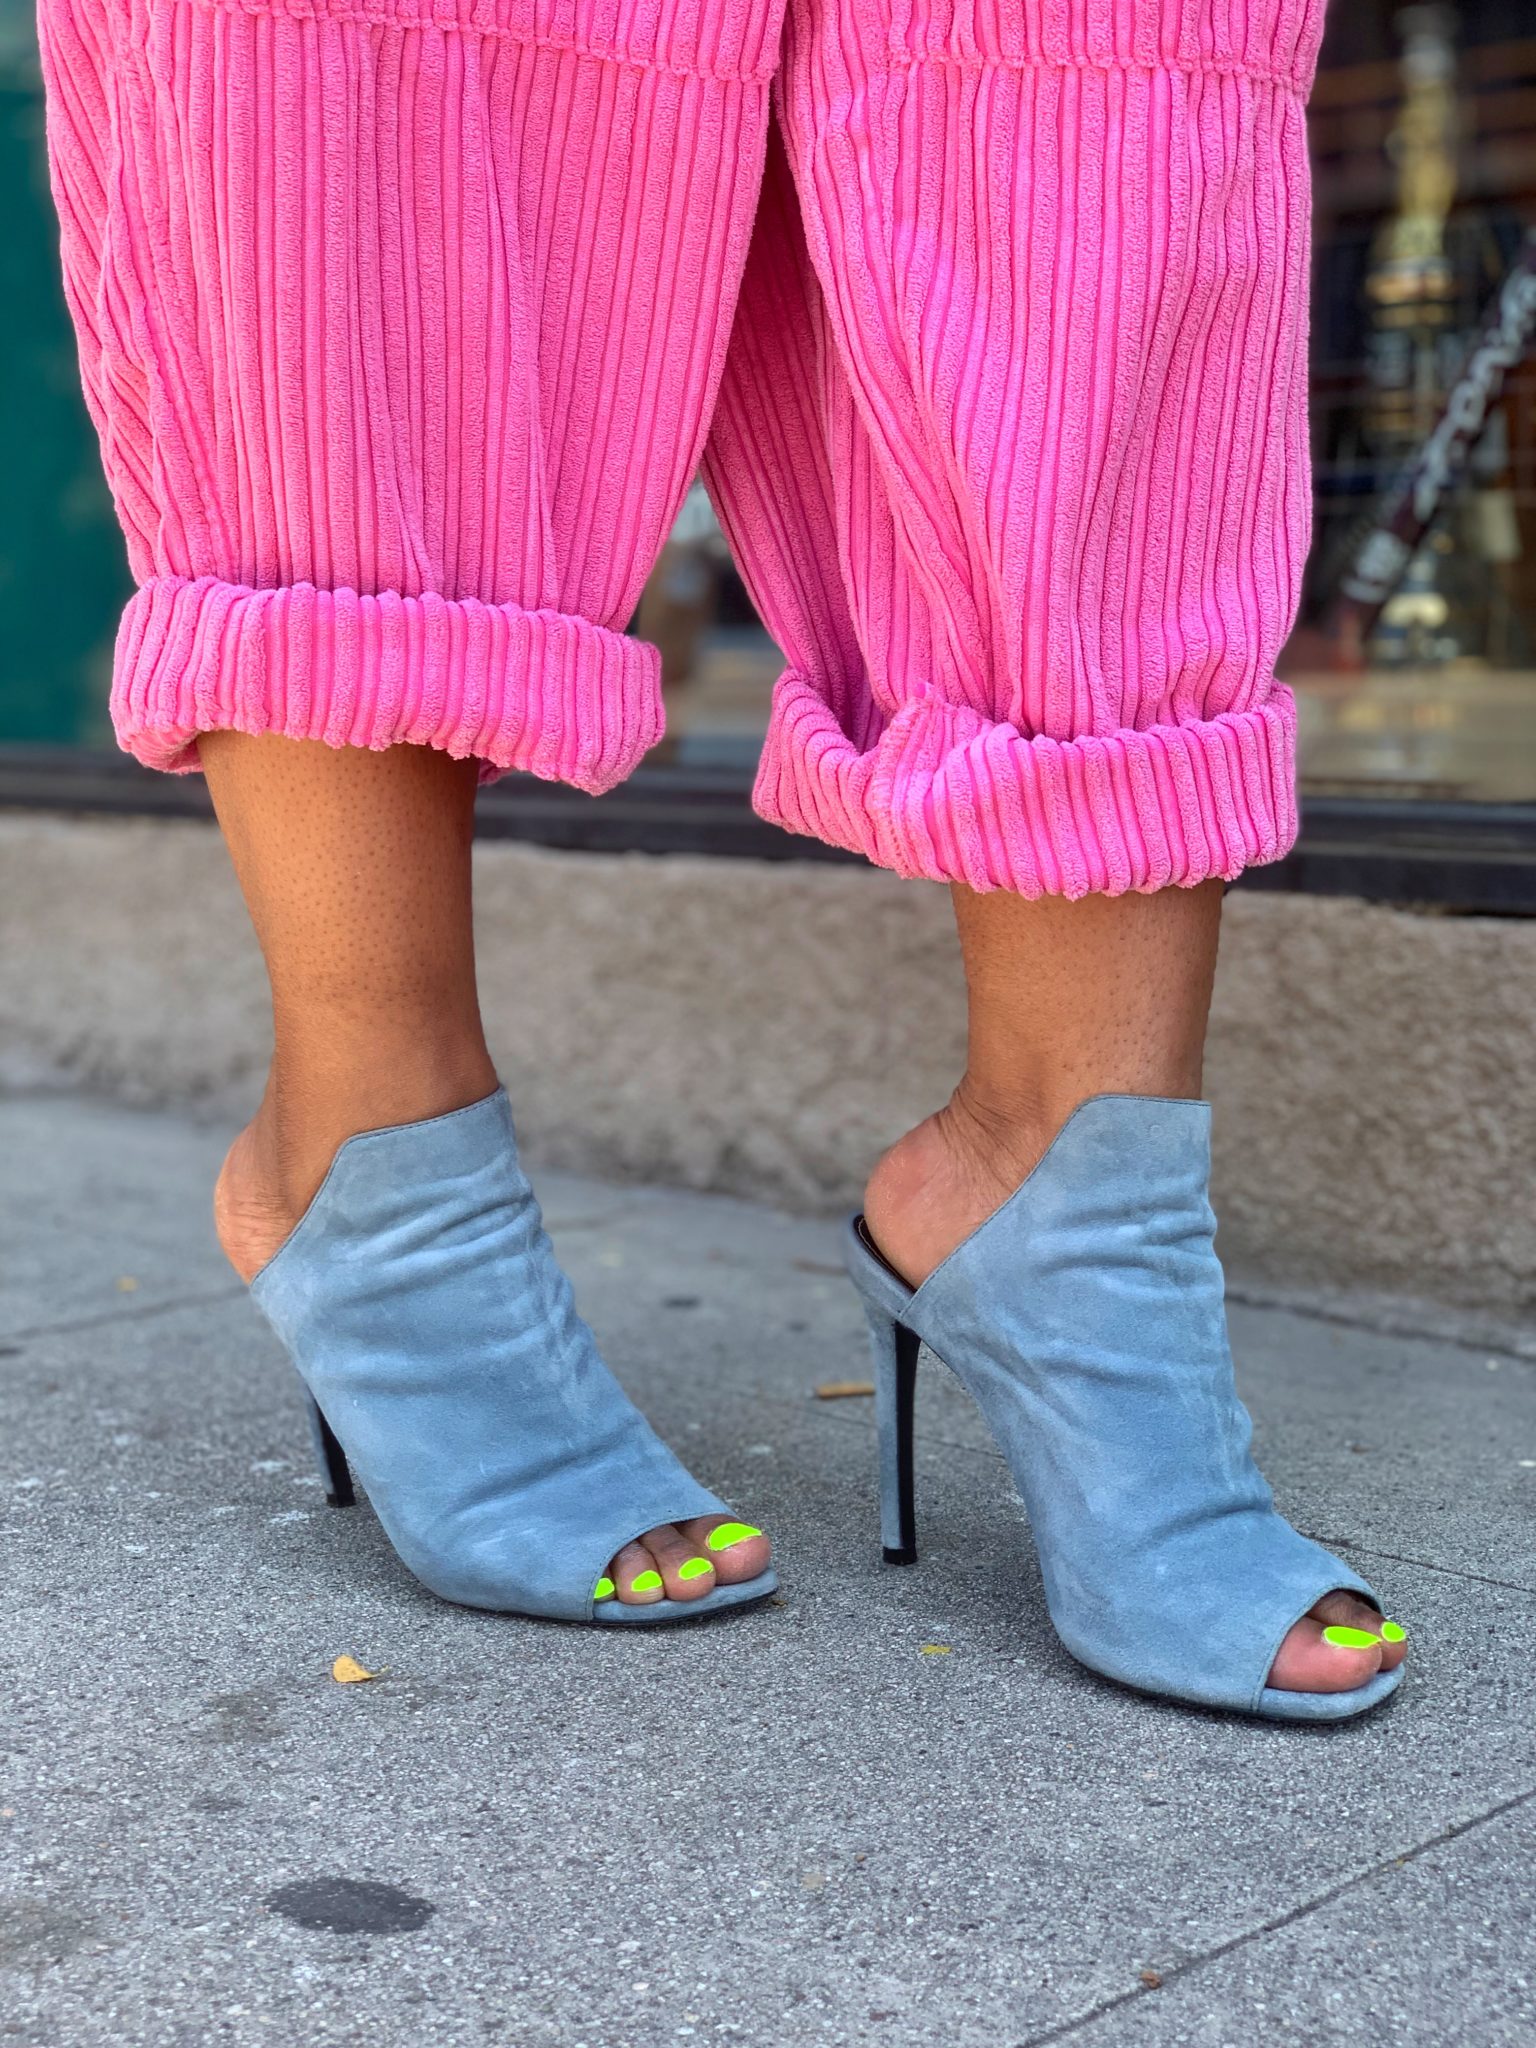 5 Staple Shoes You Need in Your Wardrobe